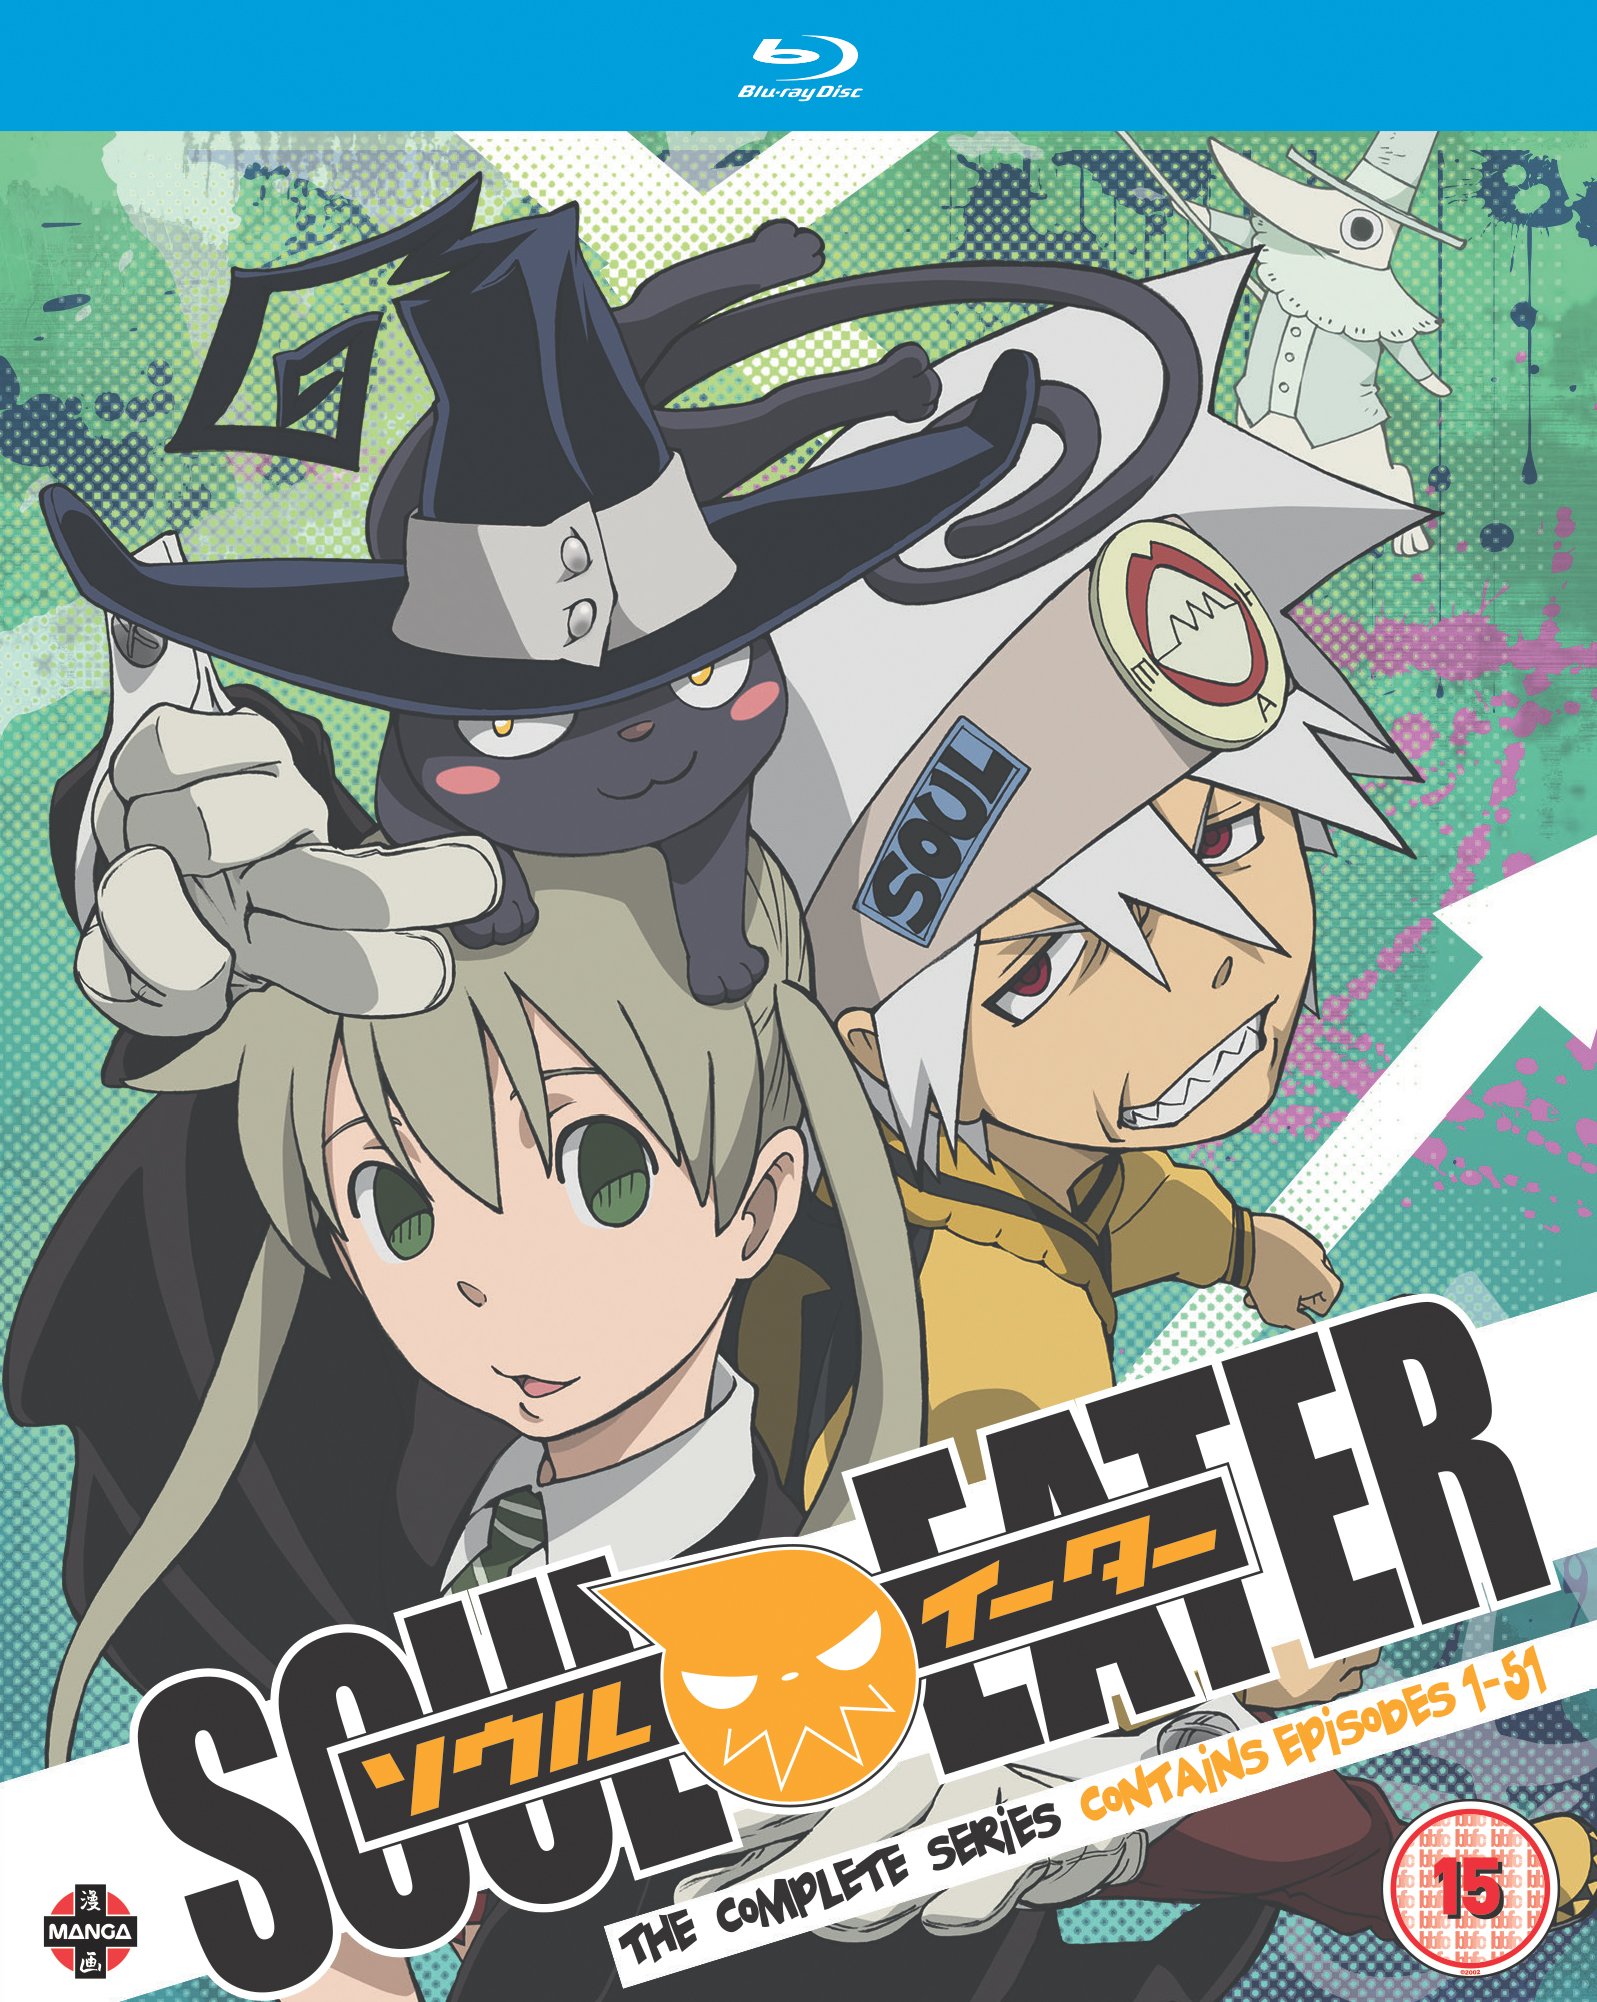 darcy affleck recommends soul eater eng dub pic